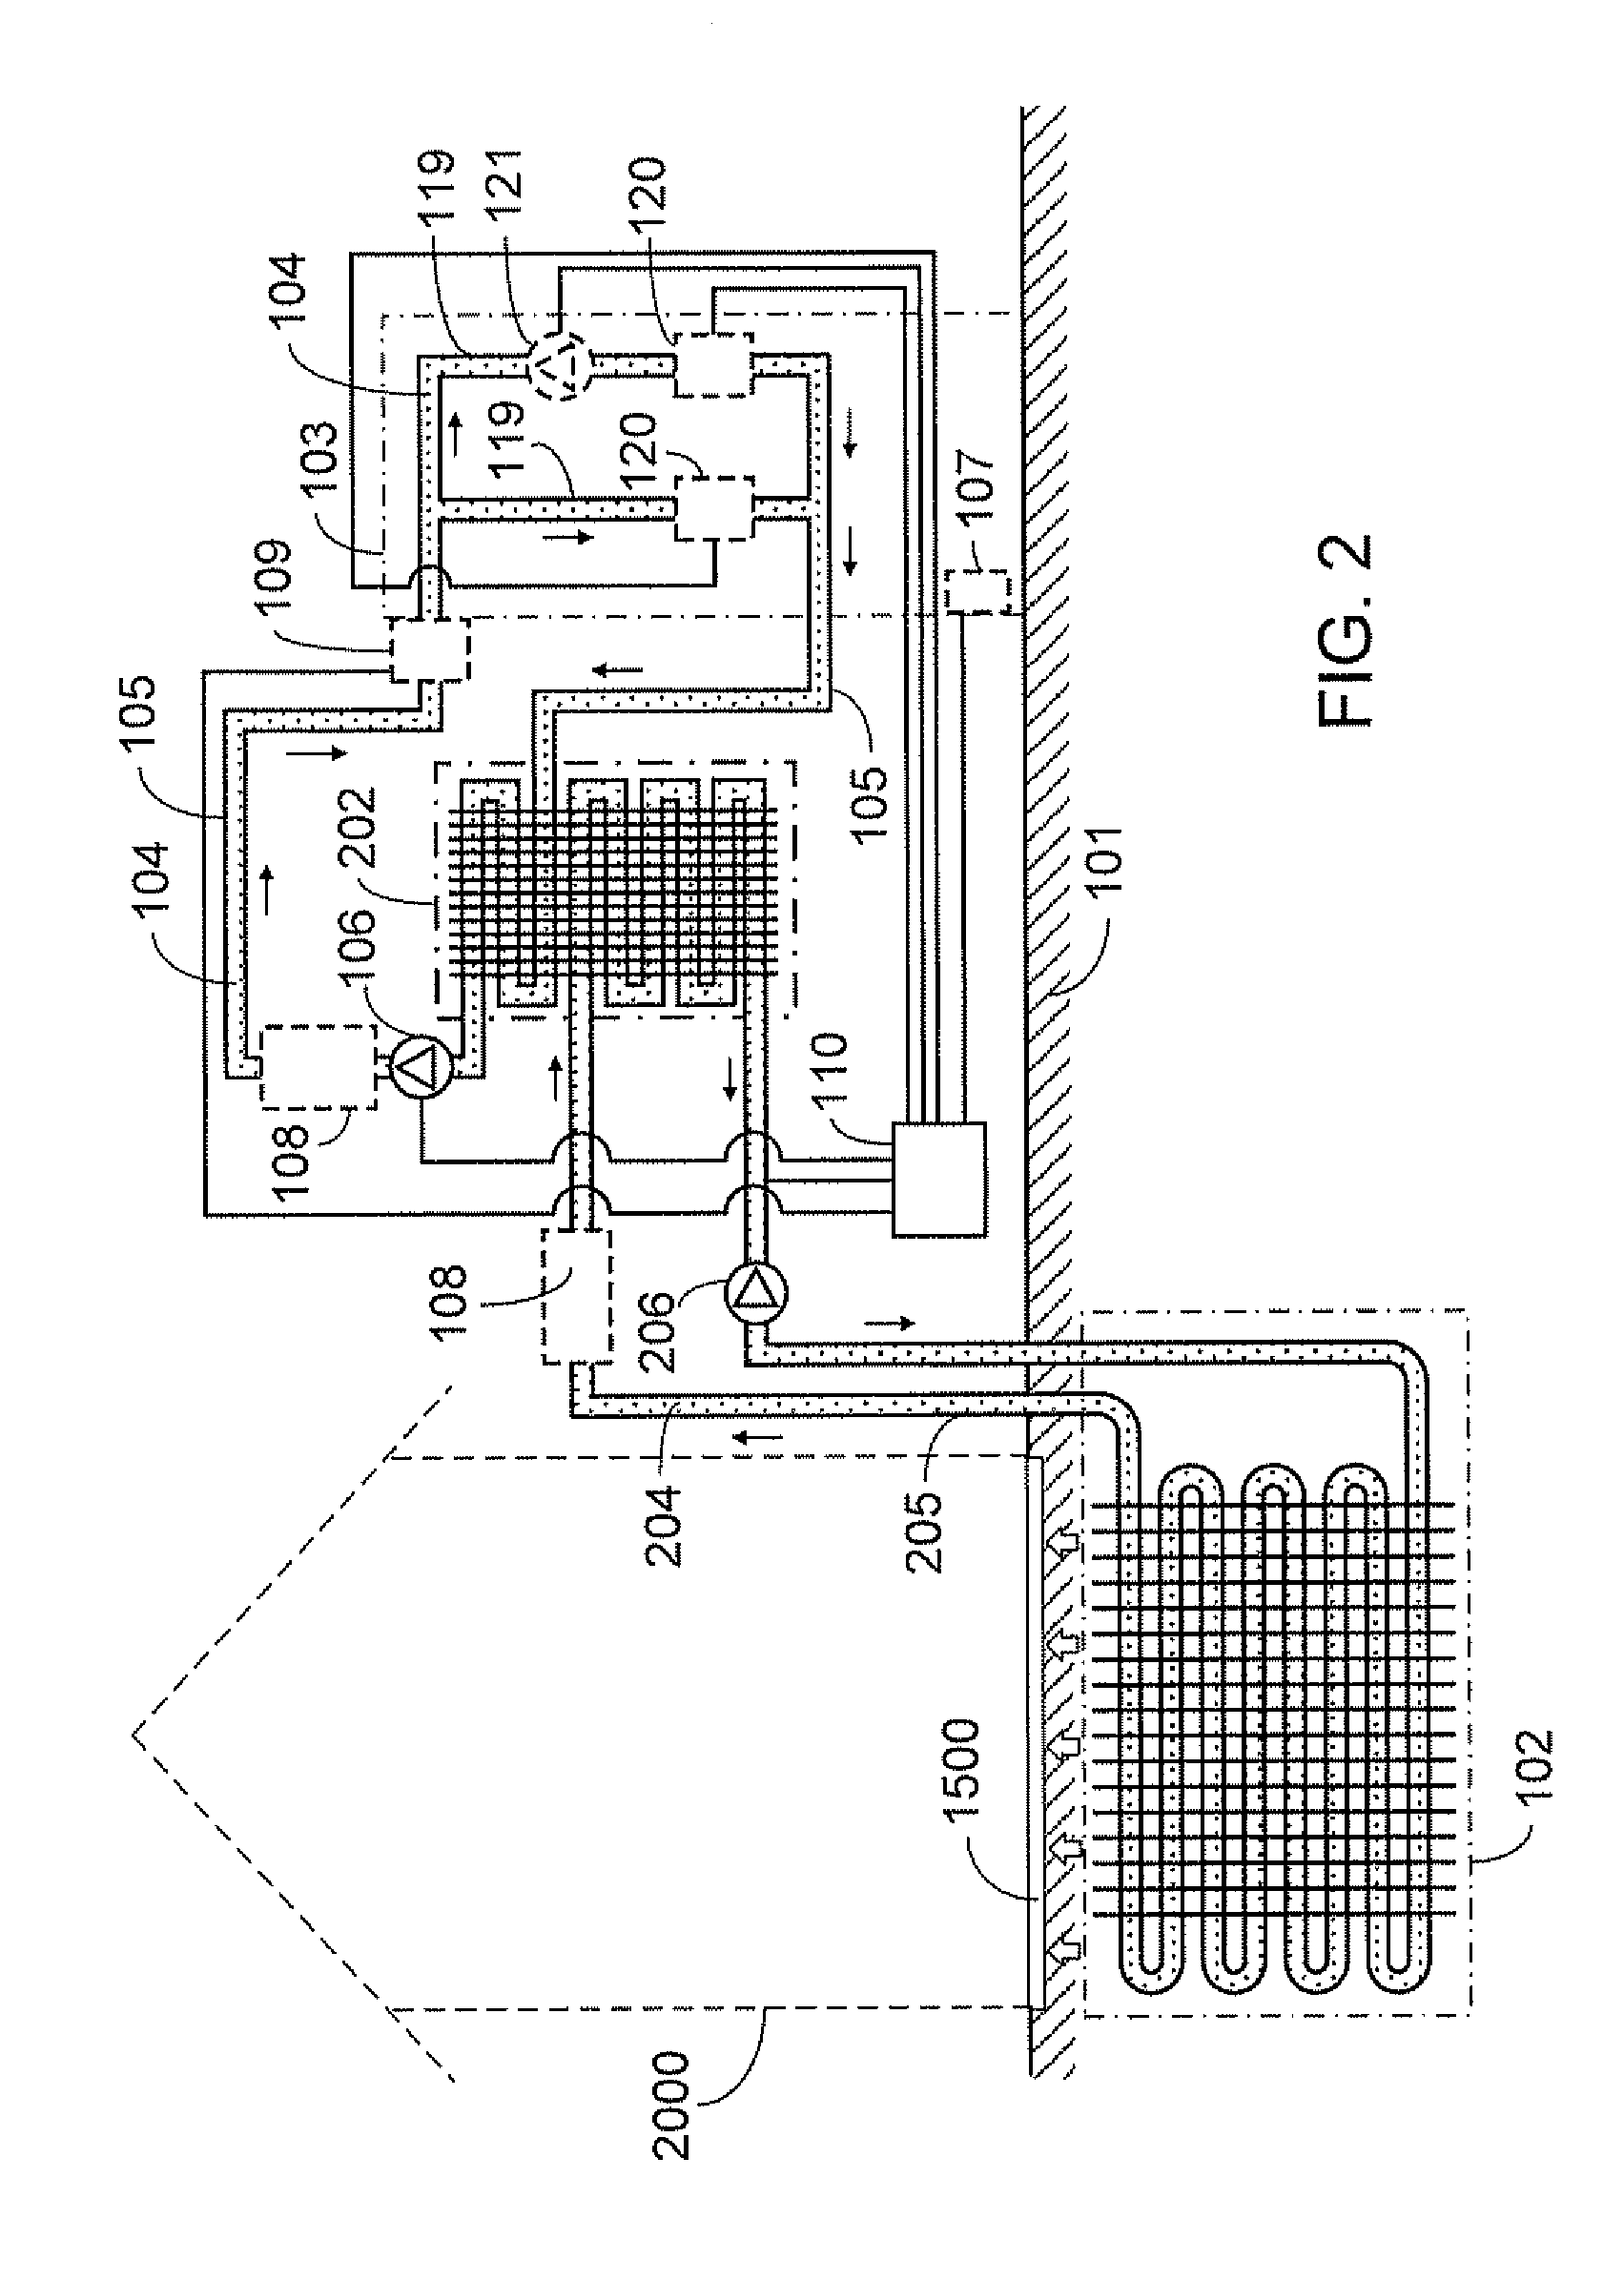 Temperature unifying and heat storing system of semiconductor heat loss though natural temperature maintaining member